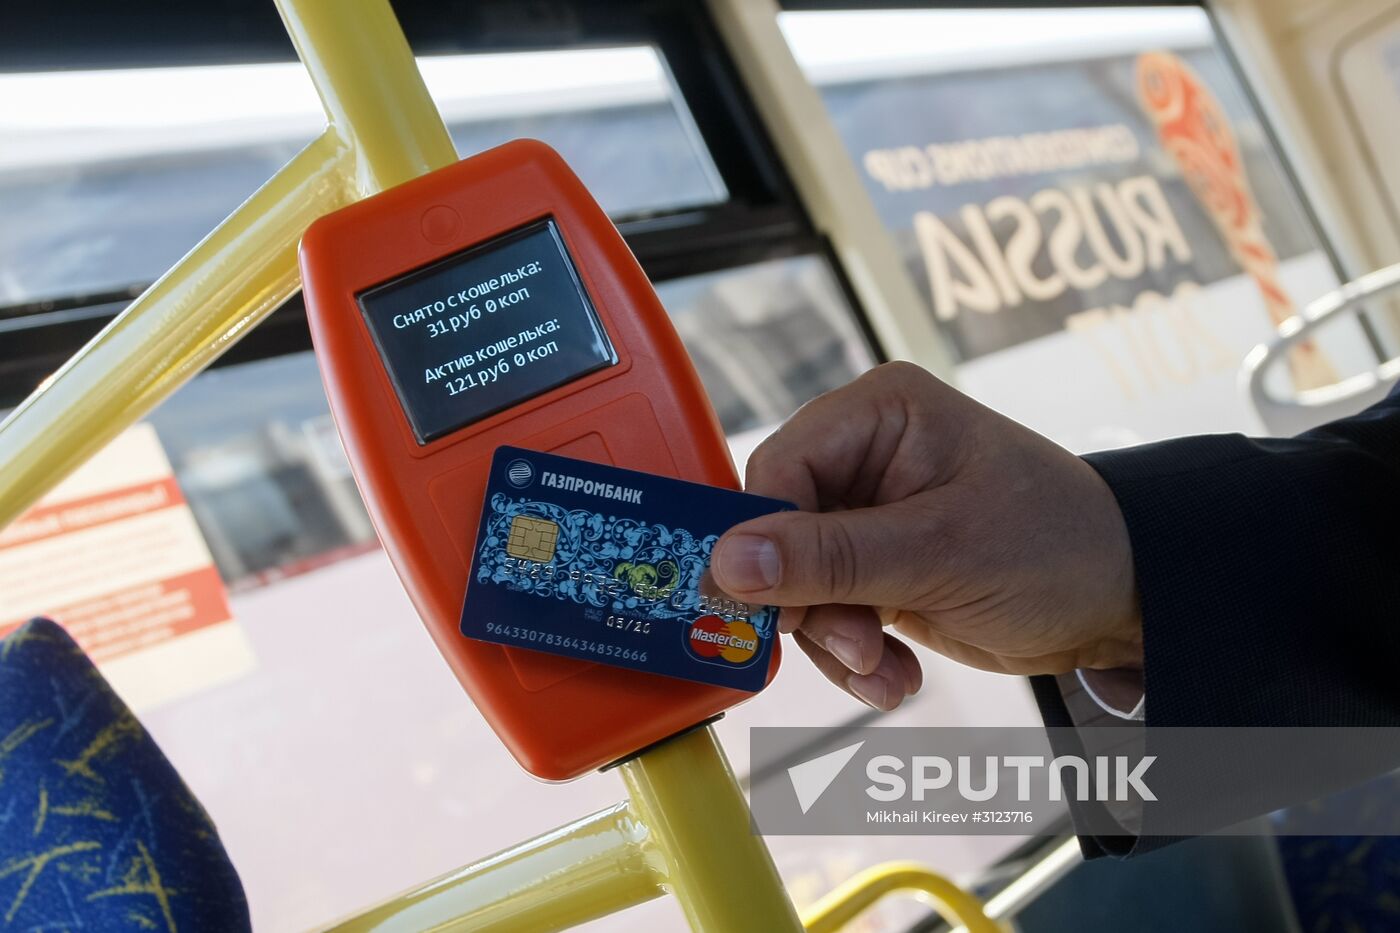 New option to pay fare via bank cards and mobile devices is available in St. Petersburg buses